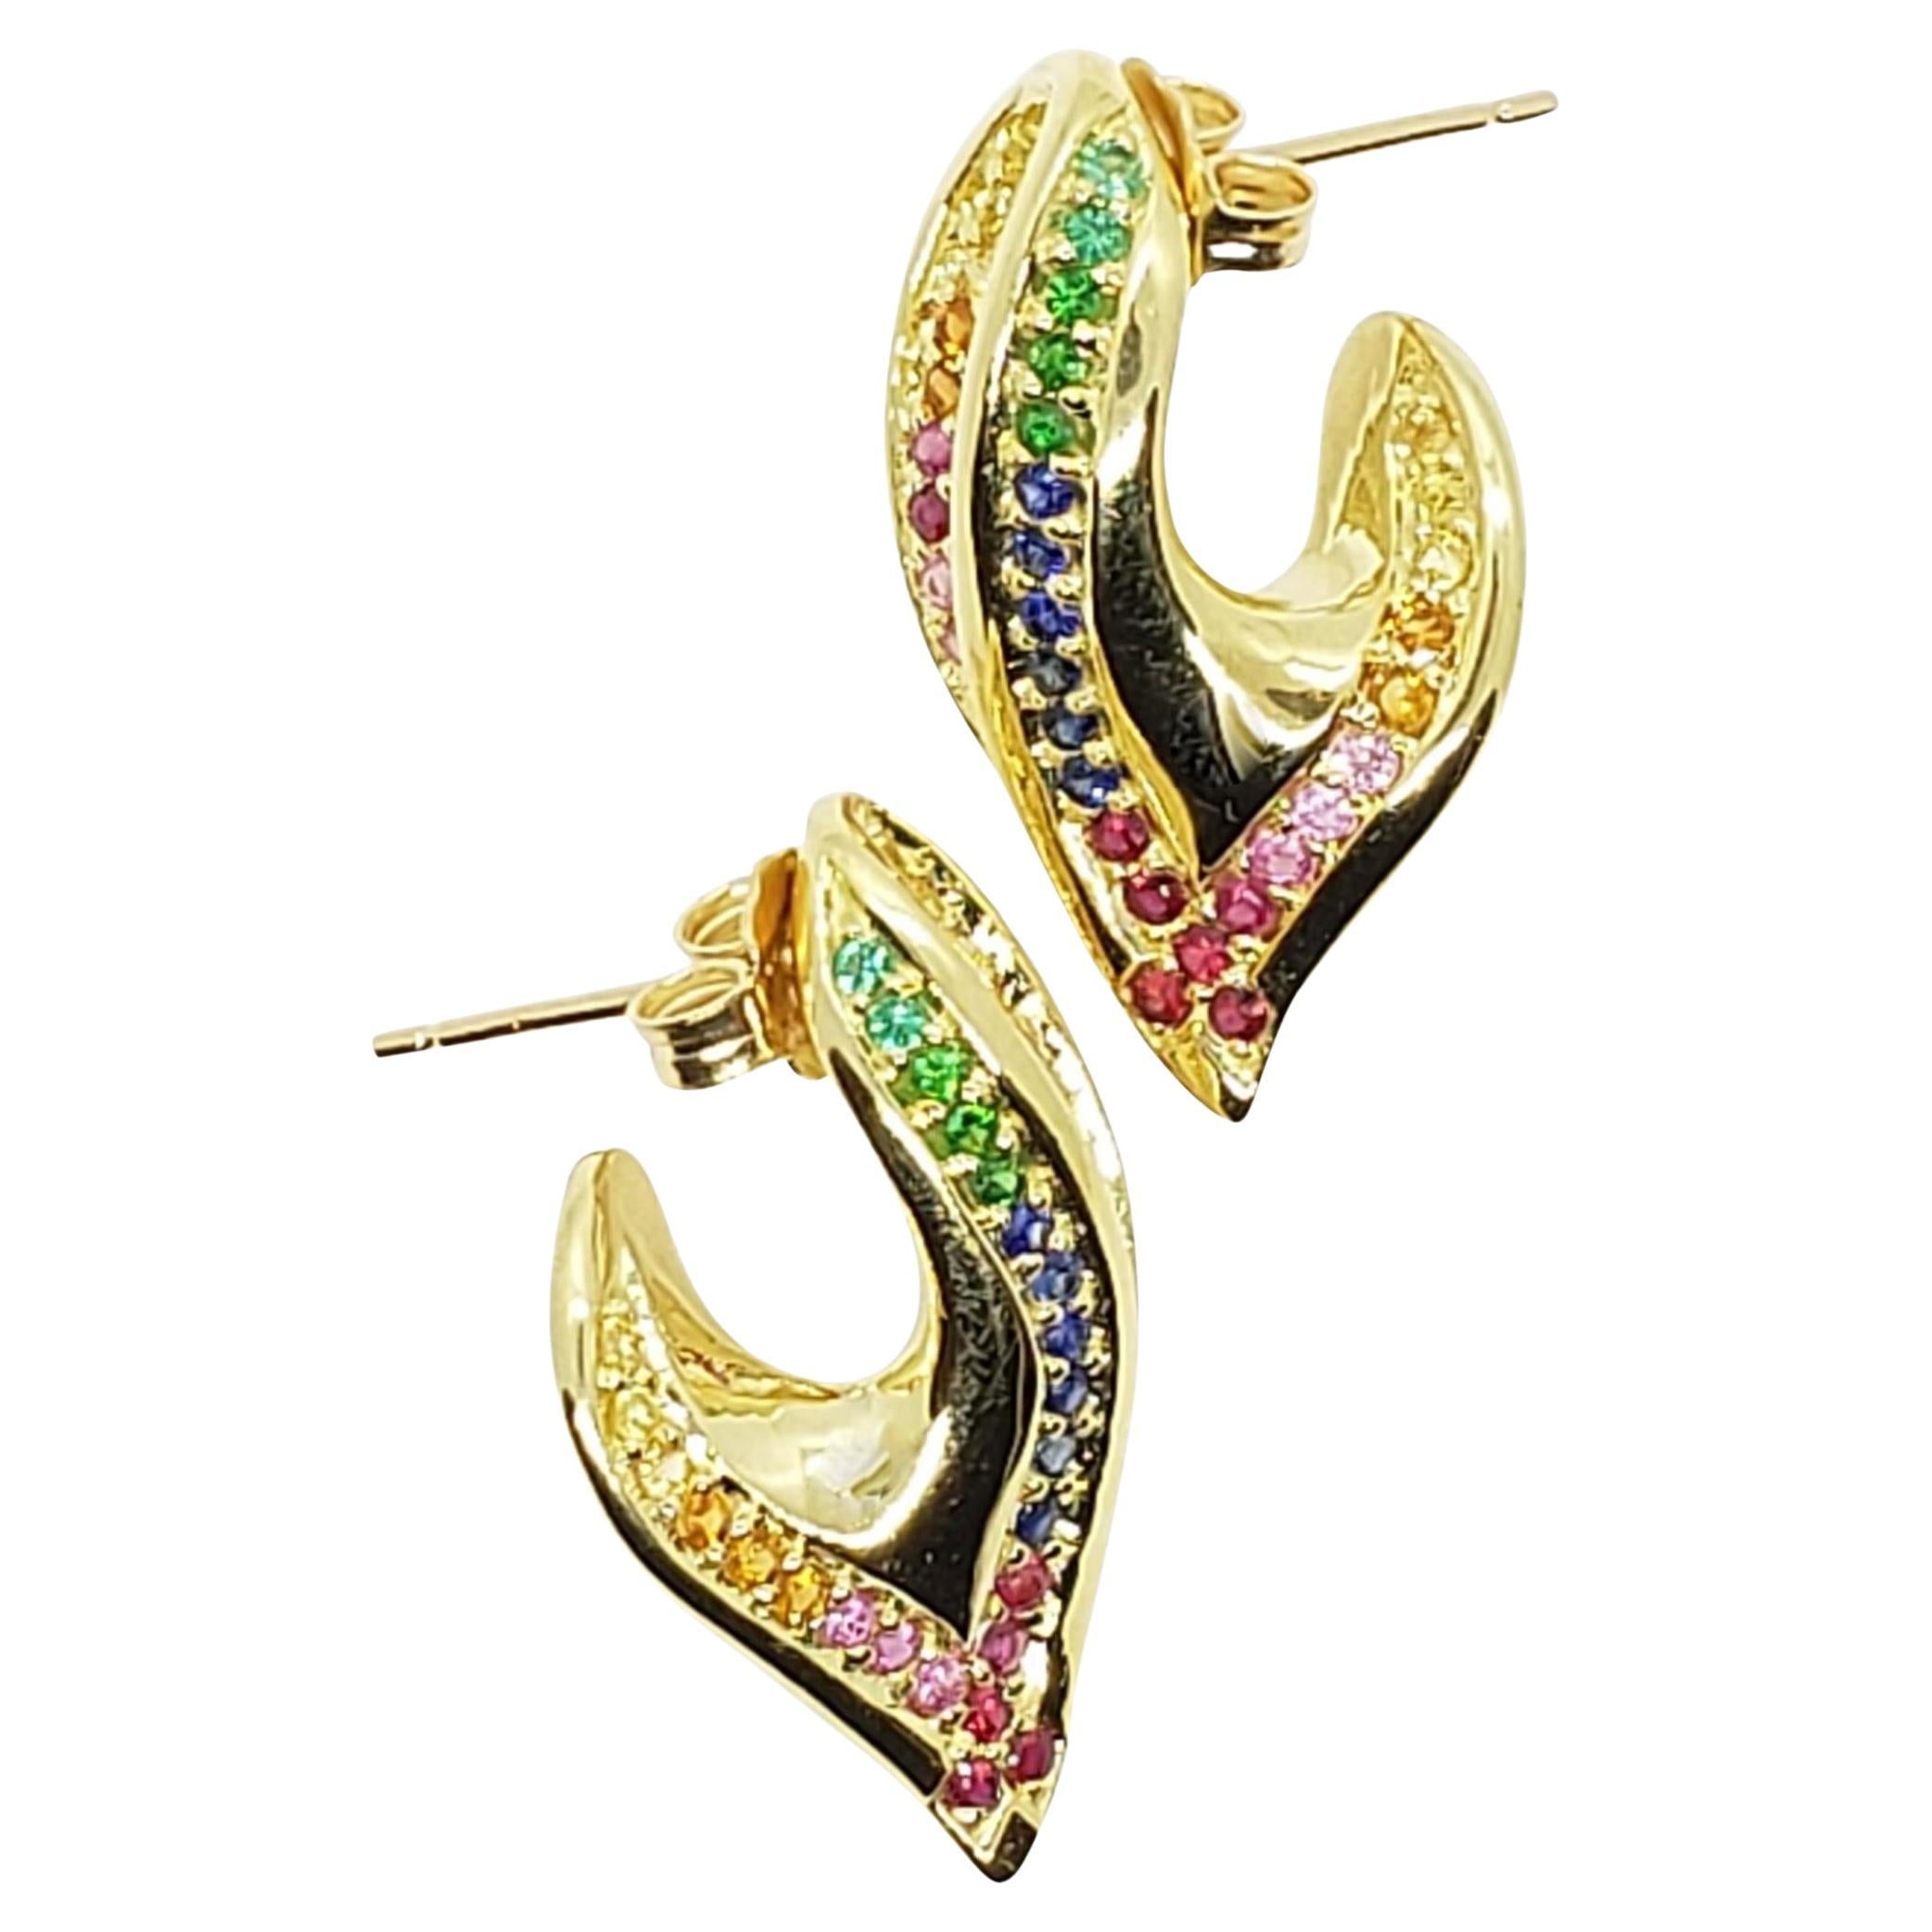 Sculptural Ear Hugging Scarf Earrings in Rainbow Precious Gemstones and 18K Gold For Sale